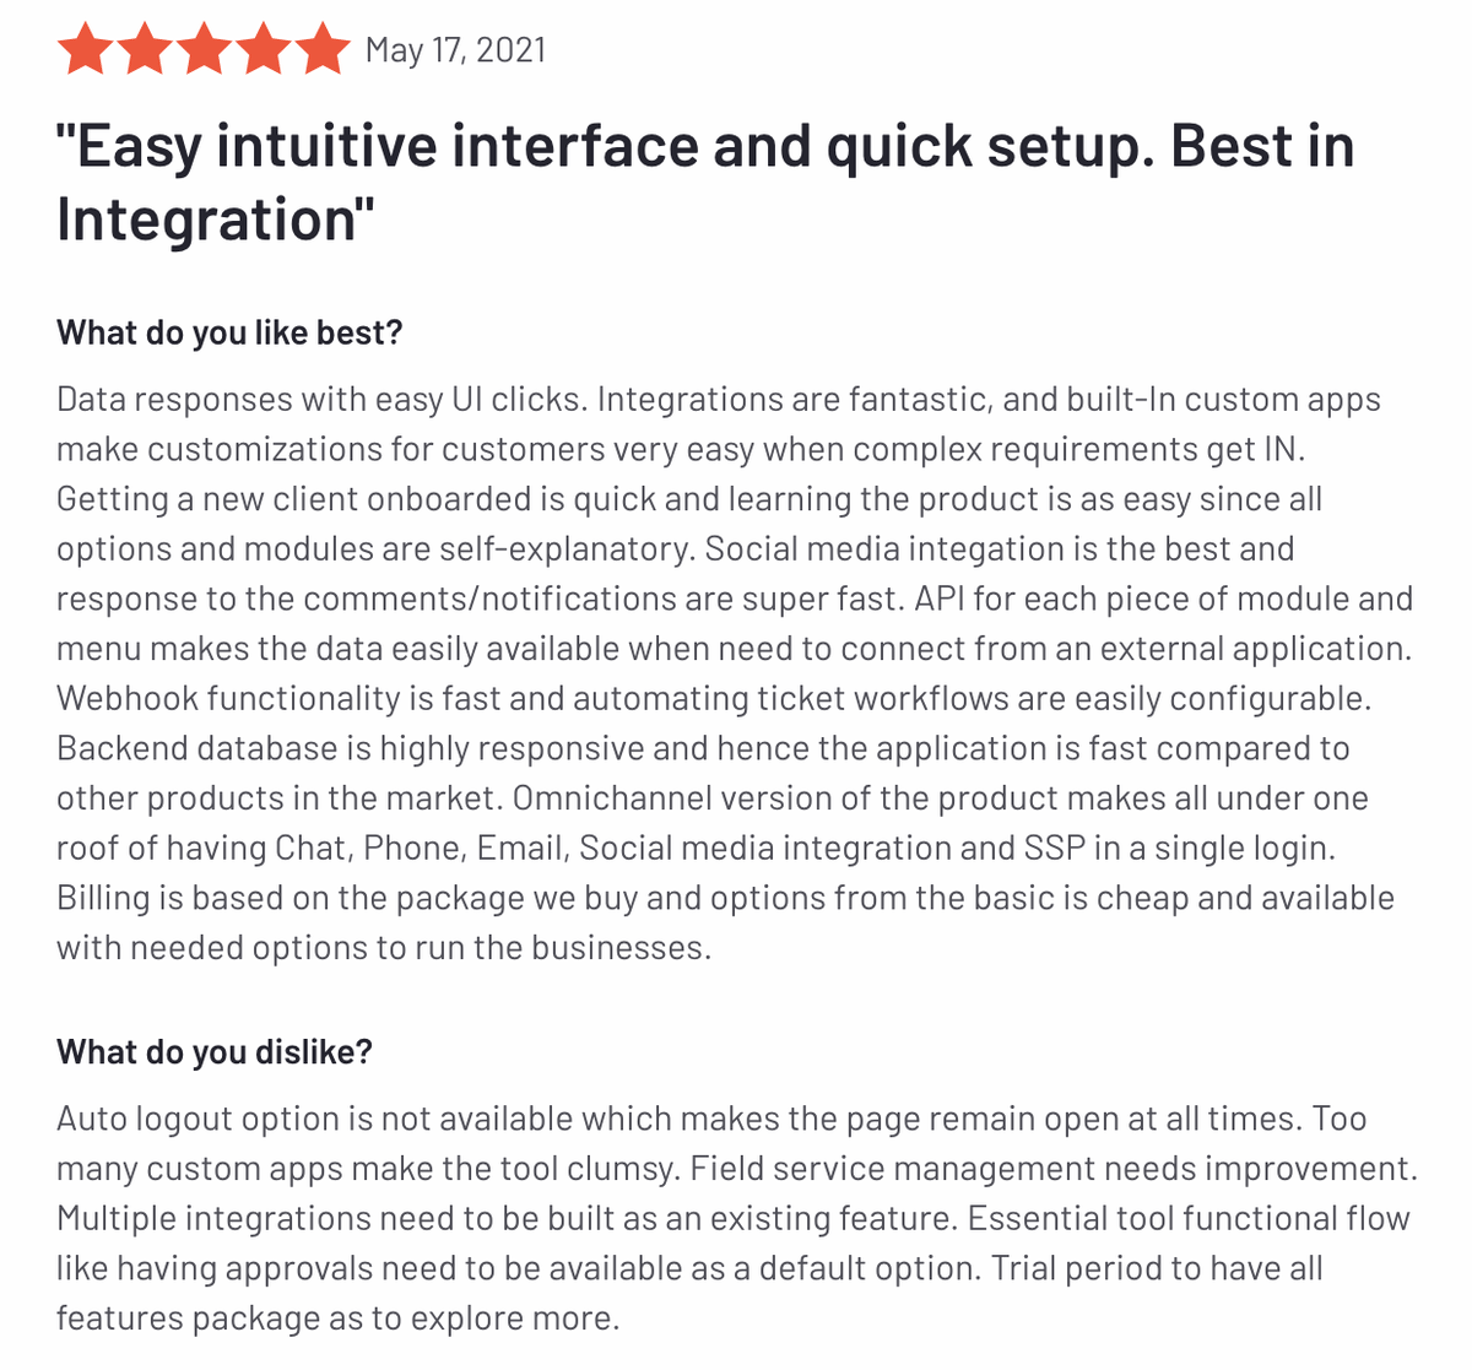 Freshdesk review: "Easy intuitive interface and quick setup. Best in Integration"